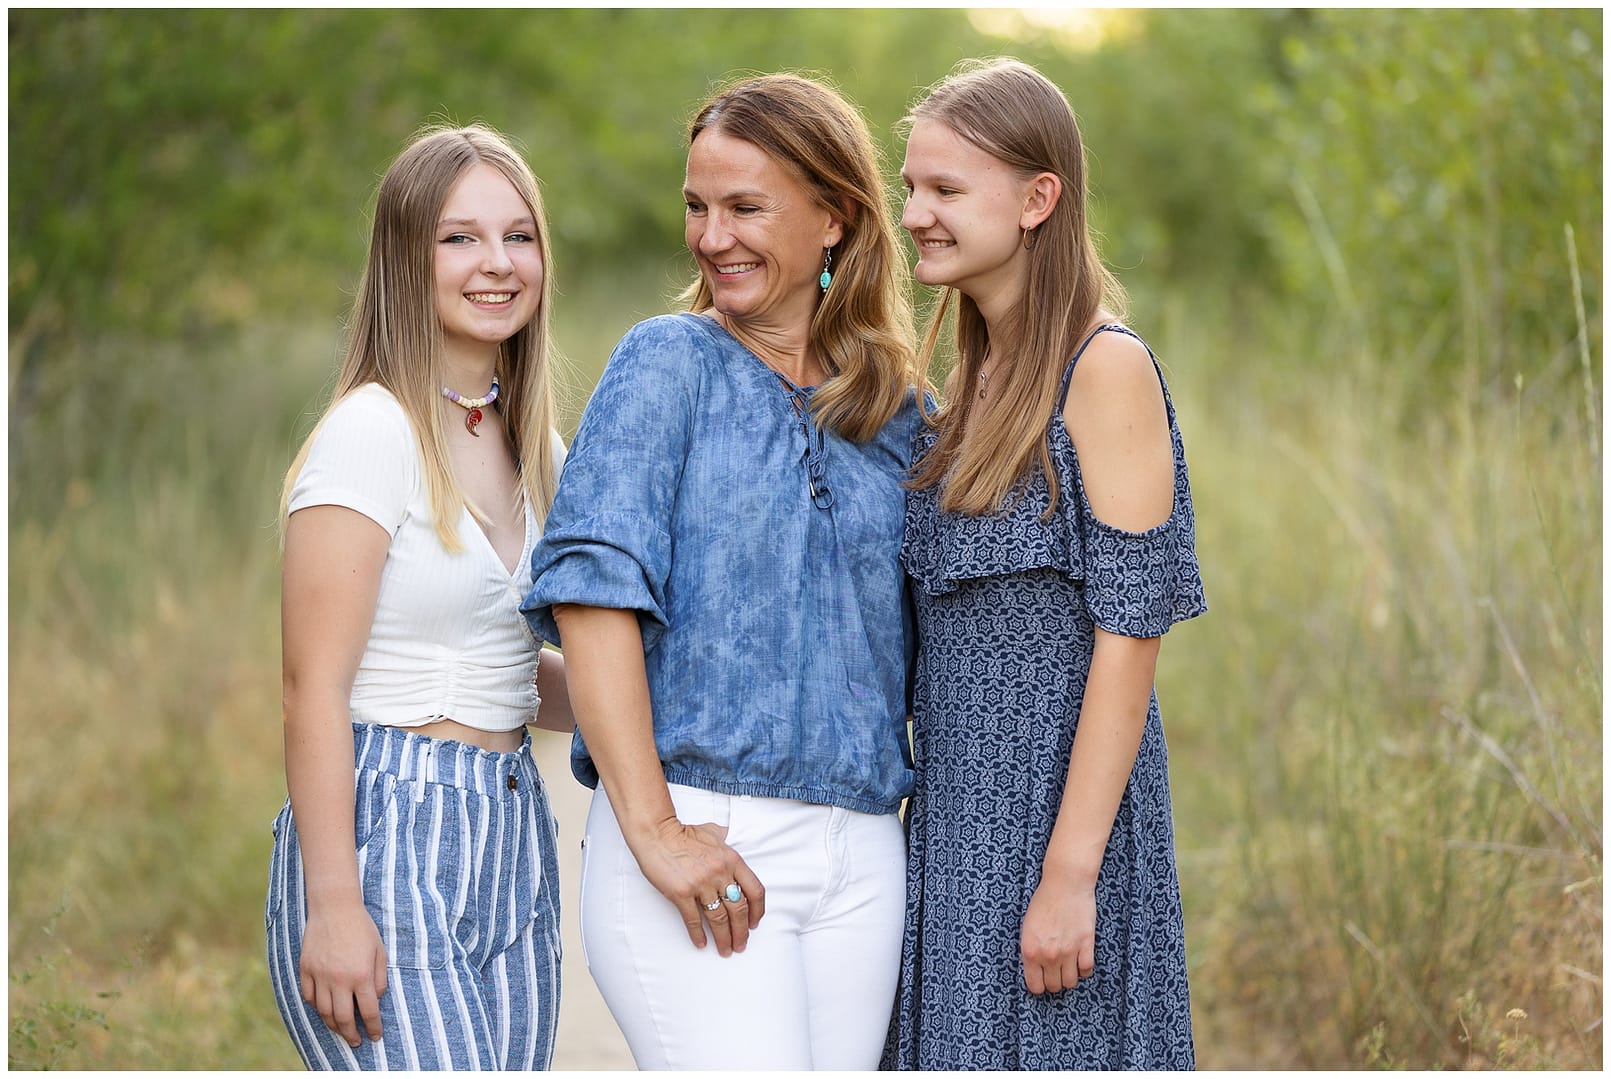 Mom and two daughters giggle during family photo shoot. Photo by Tiffany Hix Photography.